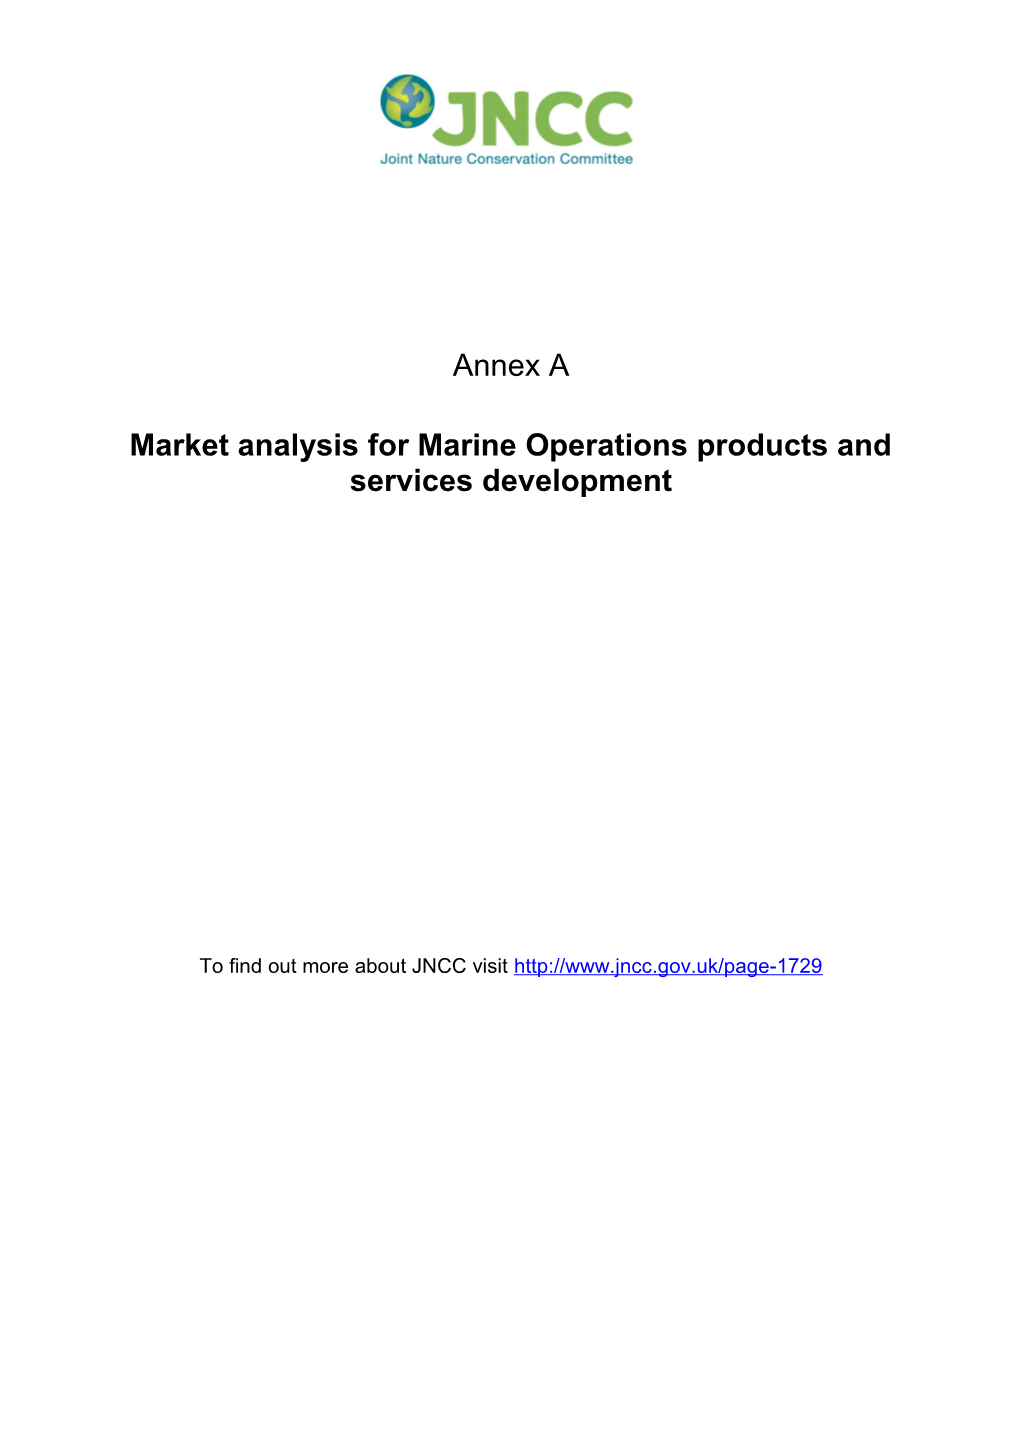 Market Analysis for Marine Operations Products and Services Development